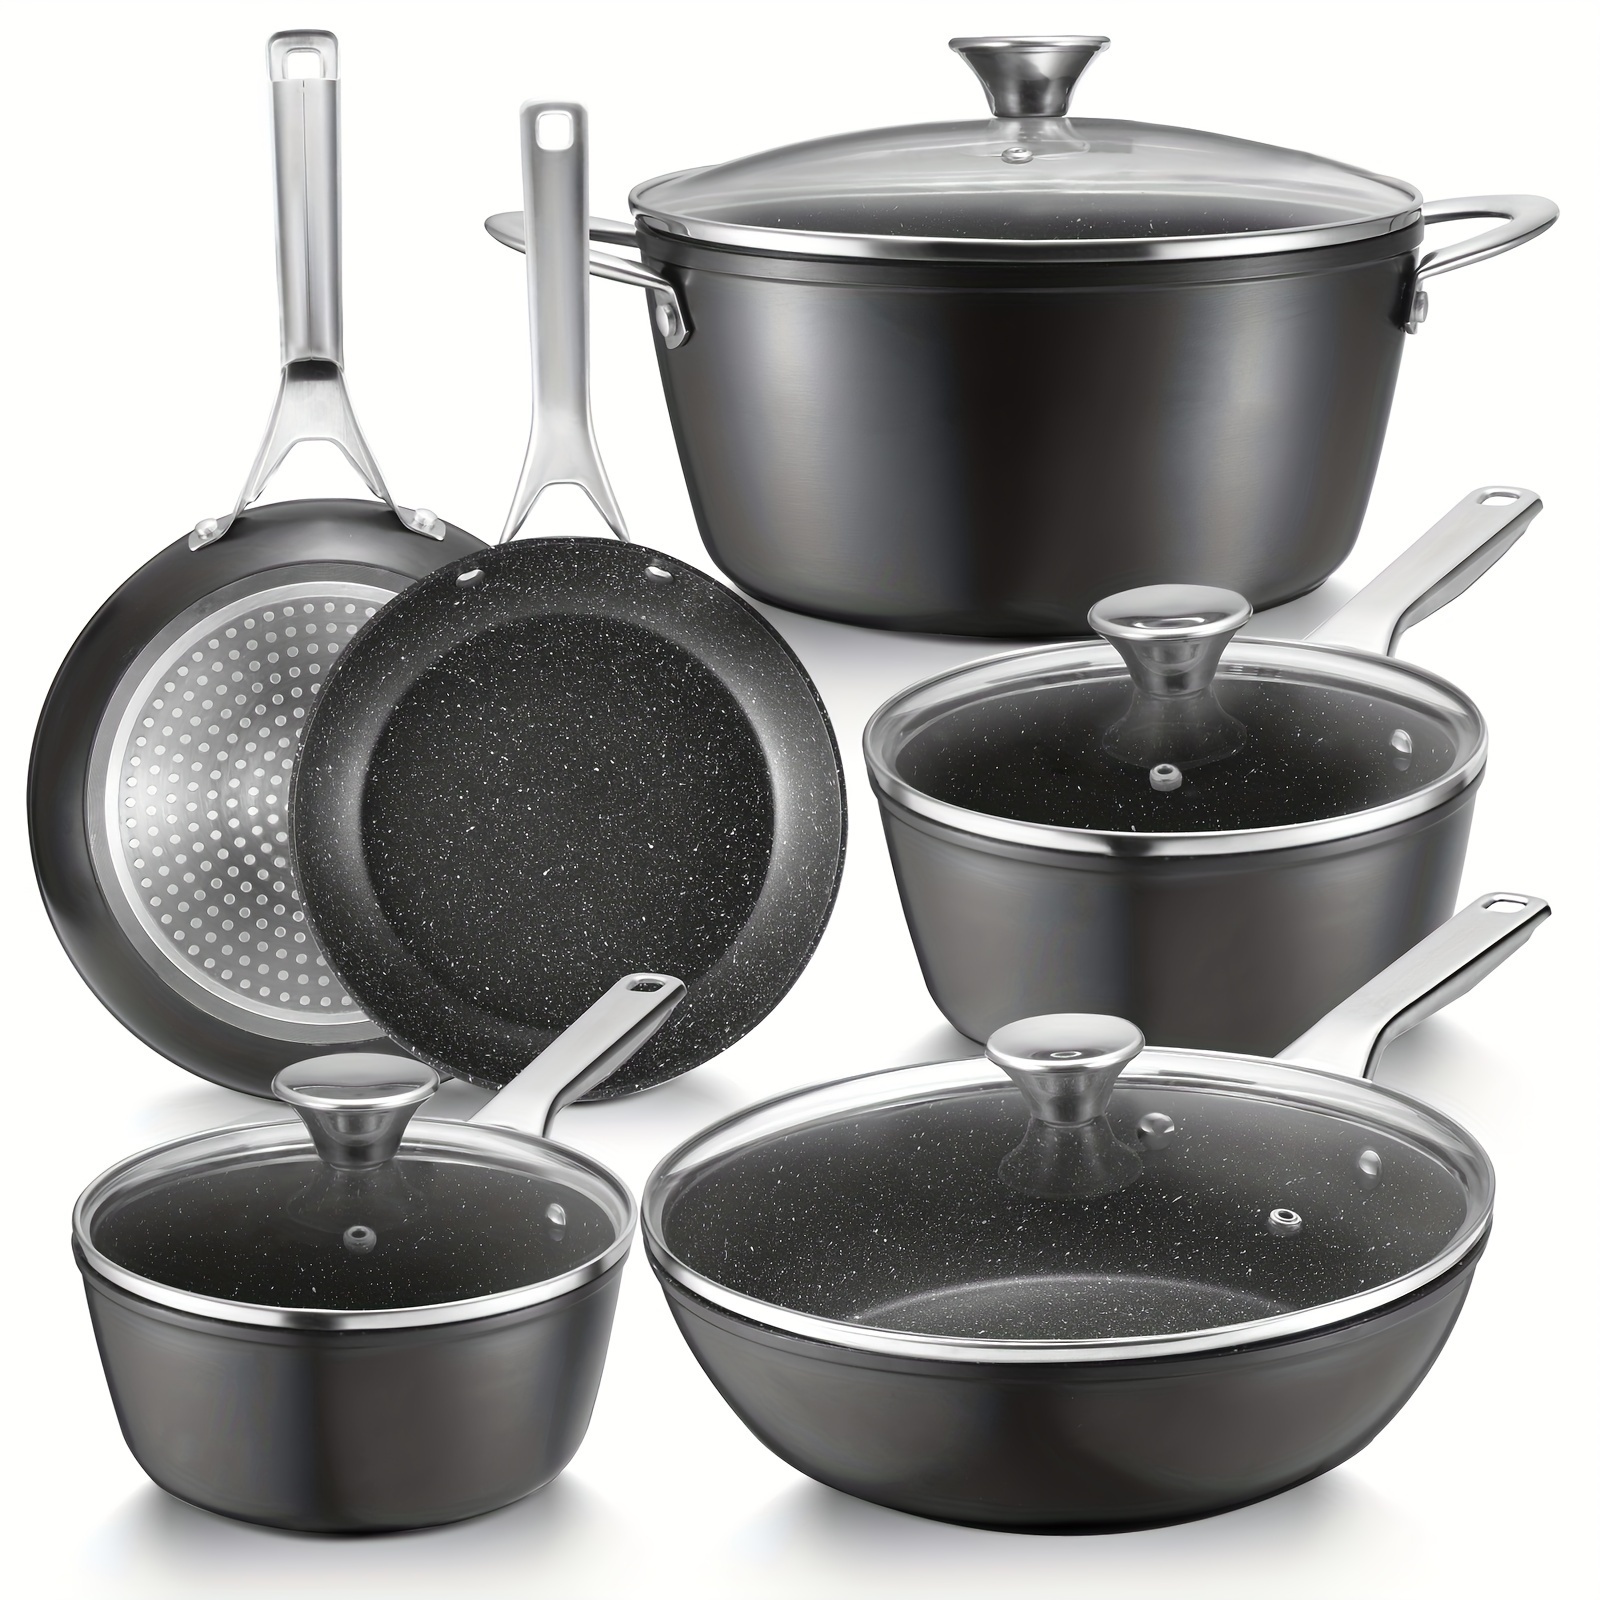 

Pots And Pans Set Nonstick, Induction Cookware Sets 10 Piece, Compatible With All Stoves, Dishwasher Safe Kitchen Cooking Pan Set With Frying Pans, Saucepans & Stockpot